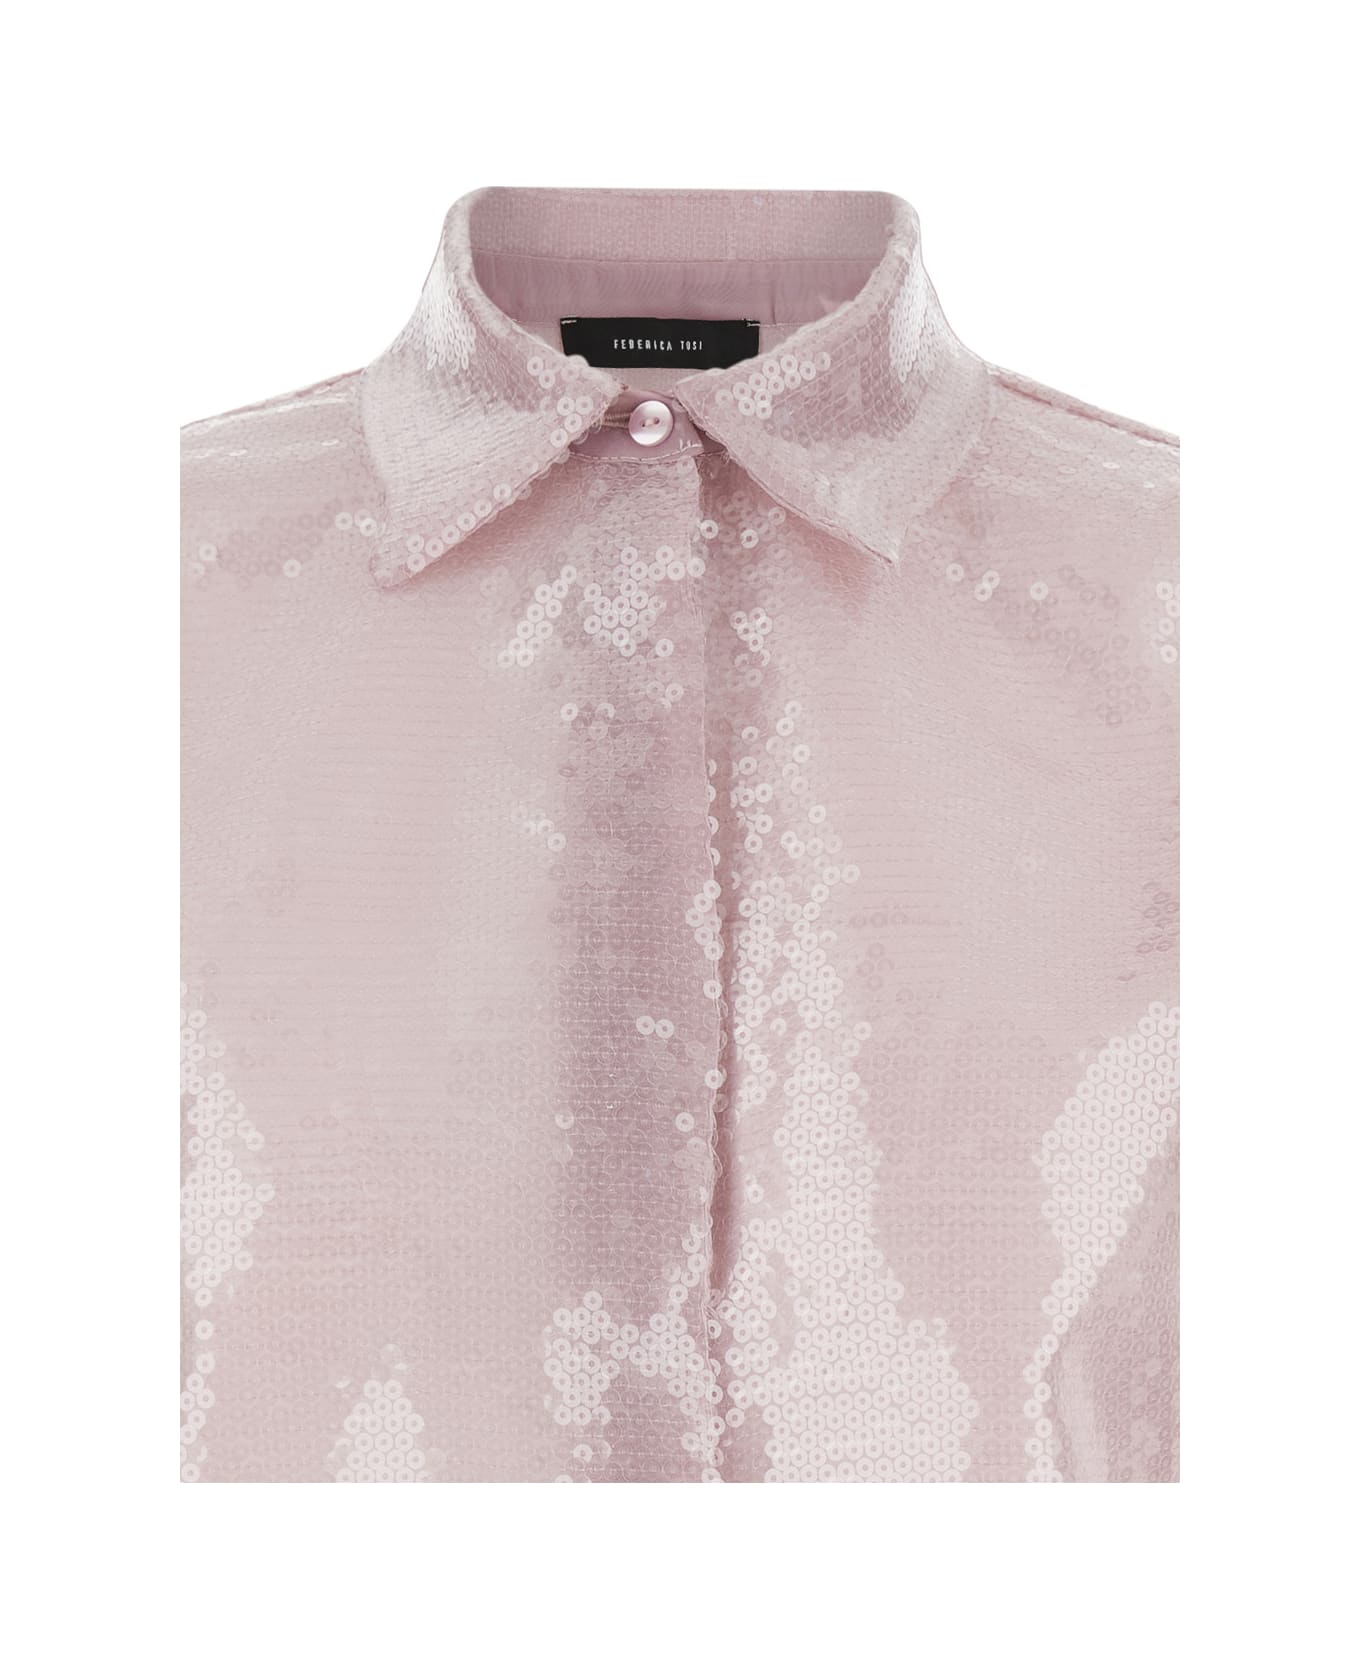 Federica Tosi Pink Shirt With Sequins In Techno Fabric Woman - Pink シャツ